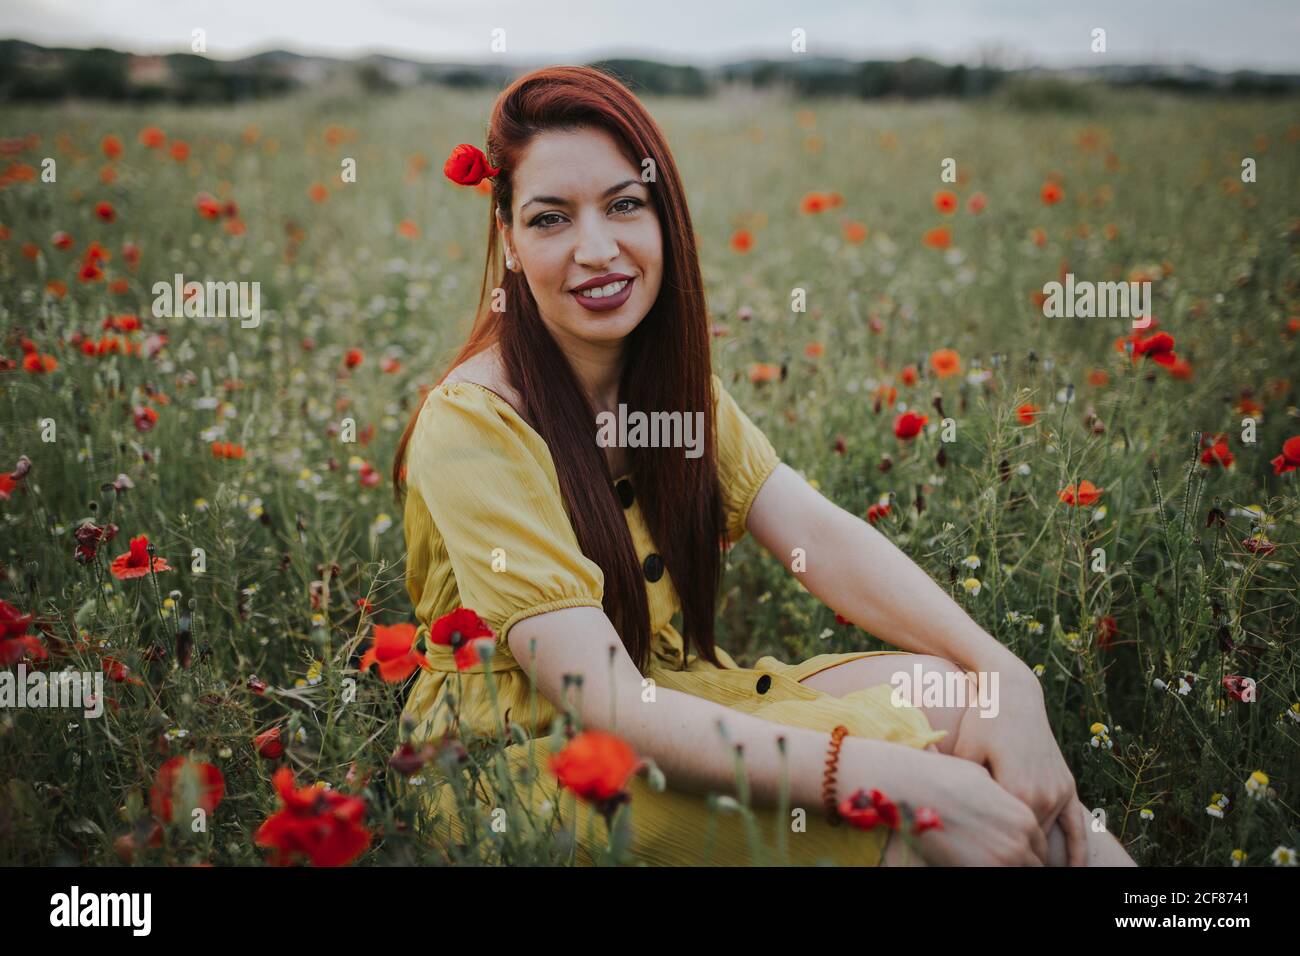 Pensive attractive red haired adult lady in yellow dress with red poppy in hair and red lips looking over shoulder at camera while sitting alone in blurred amazing green meadow with red and white flowers against hills under gray cloudy sky Stock Photo